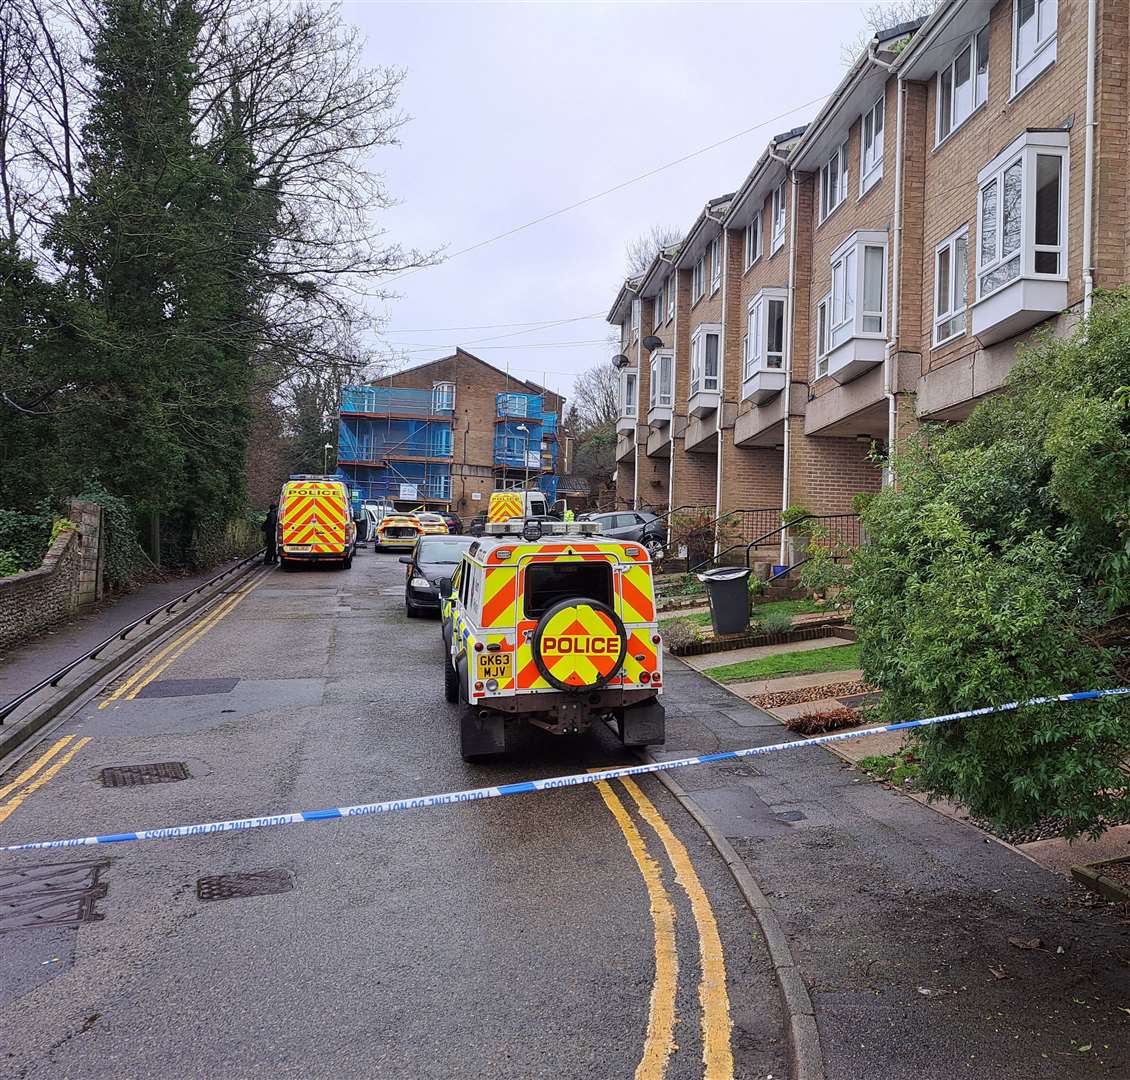 Some nine police vehicles were spotted at Anstee Road, in Dover, after a man was found dead